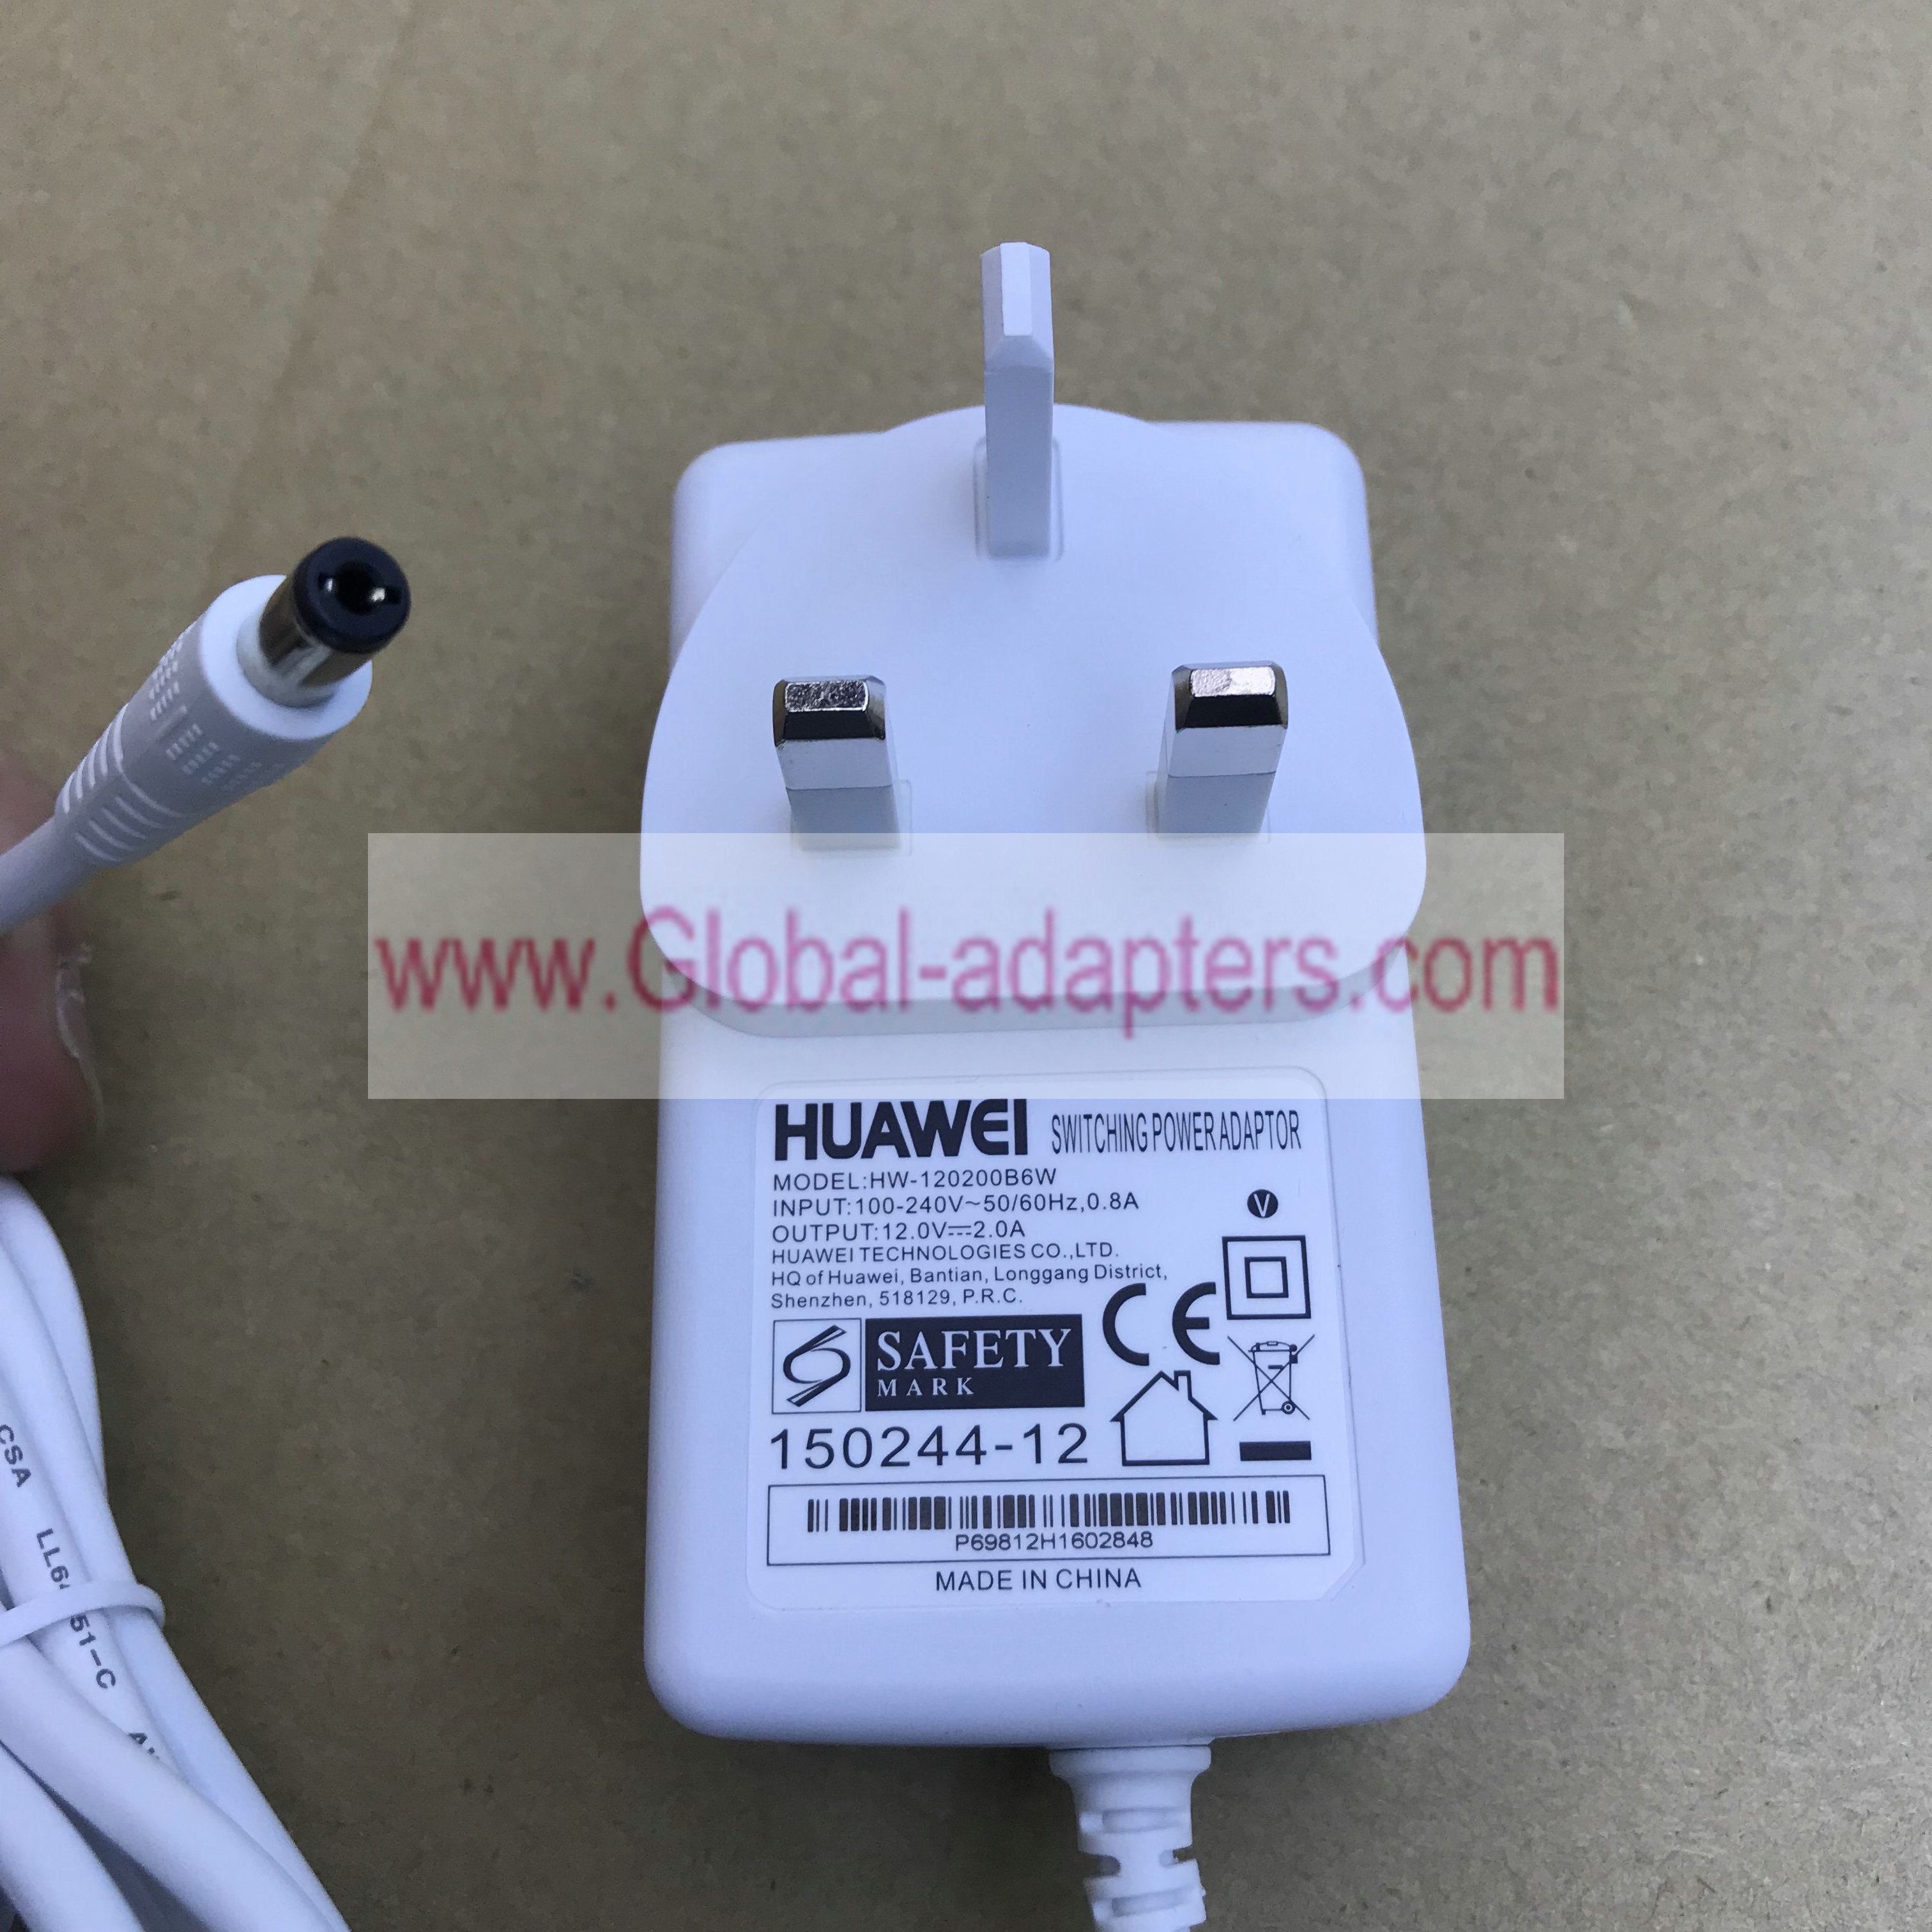 Original HUAWEI 12V 2A HW-120200B6W ac adapter power charger 5.5mm 2.1mm - Click Image to Close